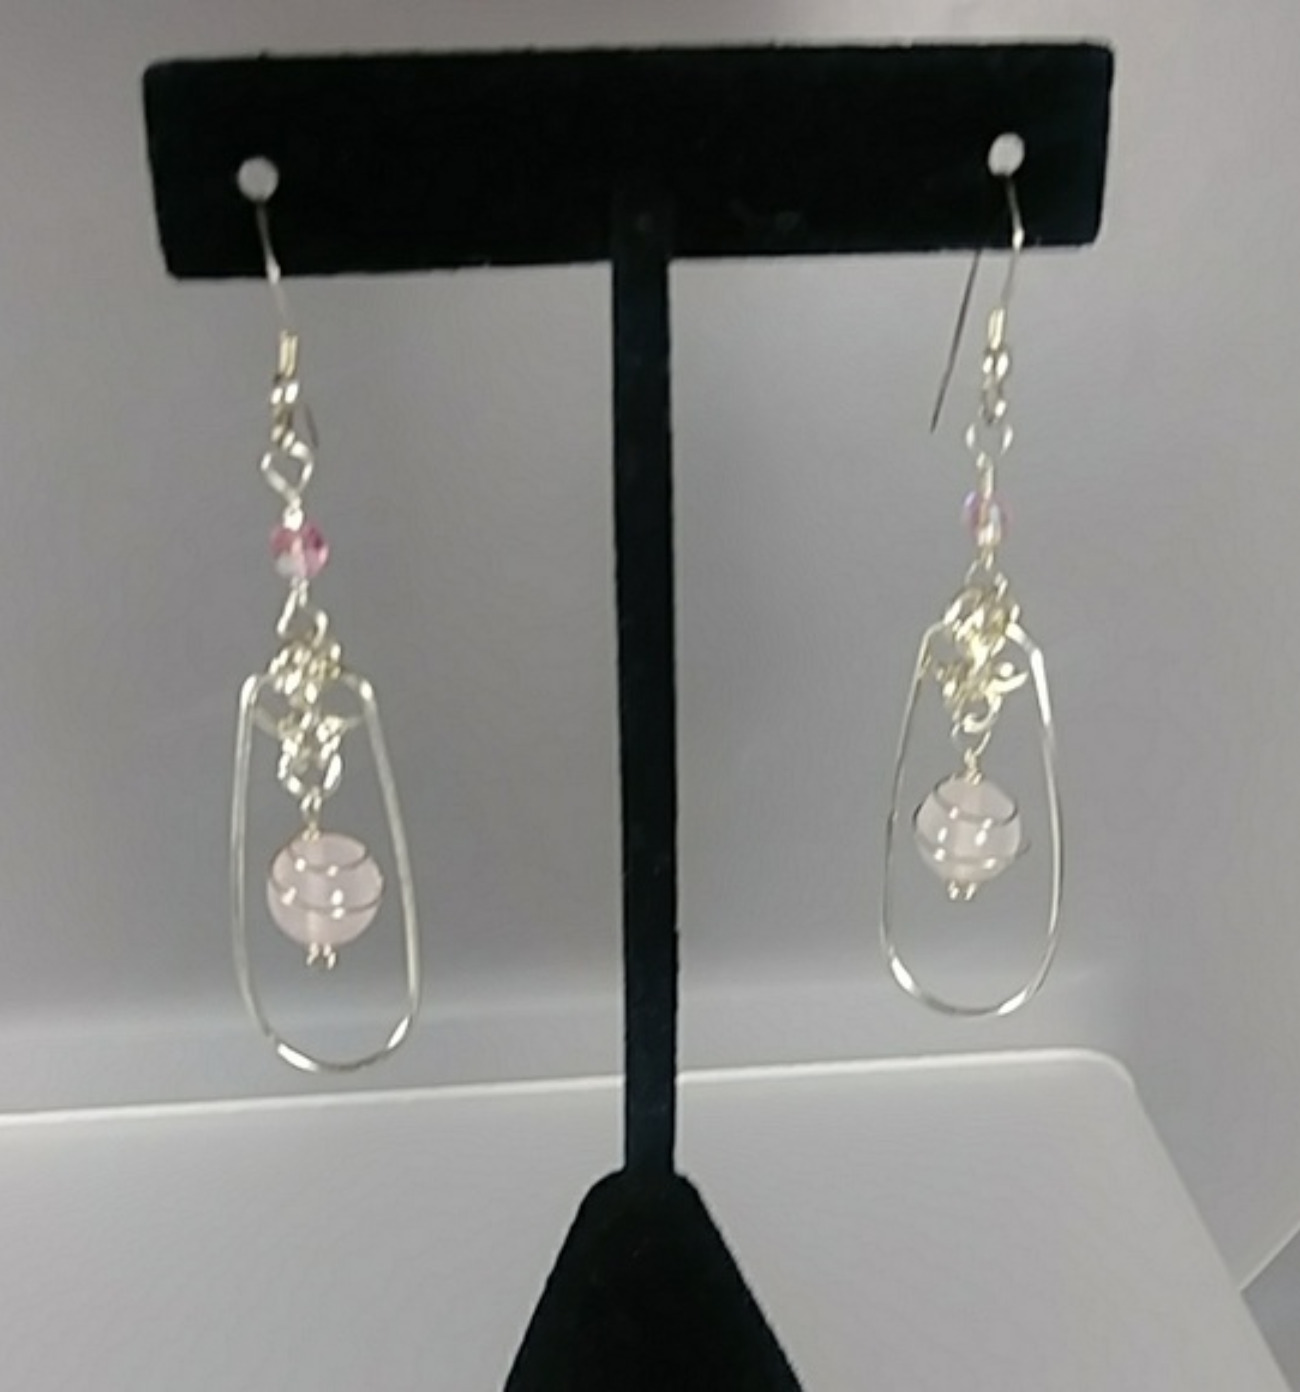 603  - EAR - Description:  Earrings: Sterling Silver Earrings, Pink Quartz Gemstones and Swarovski Crystals (Sterling Silver Earwire)  Dimension: 2 ' L (Inches)